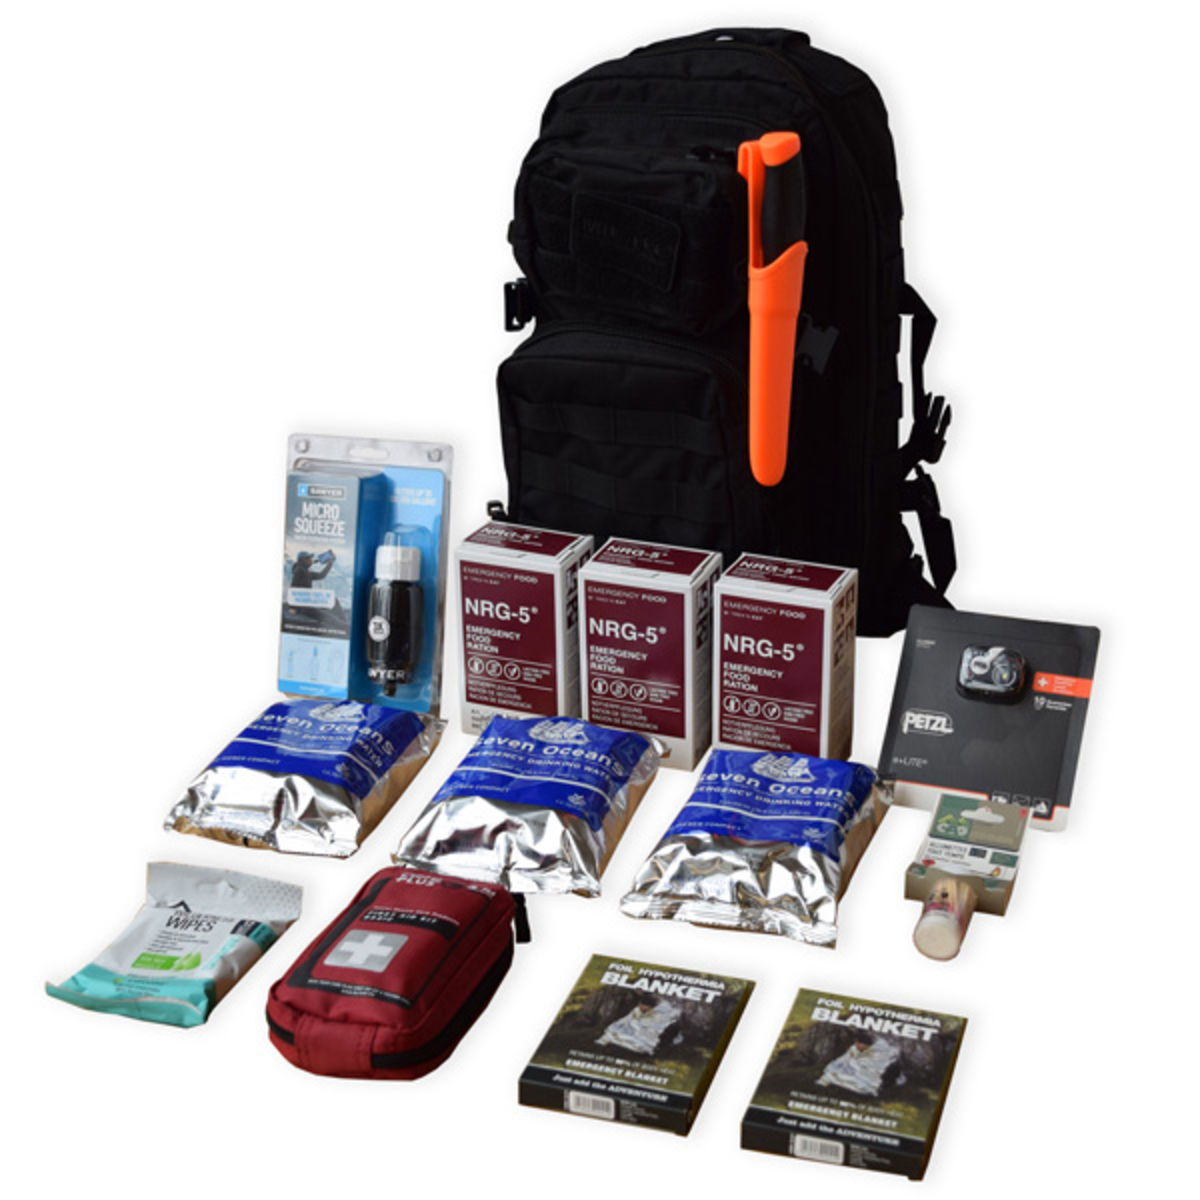 Bug out bag - 1 person - Light - Self-sufficiency and Dietary Stock - For  Emergency situations